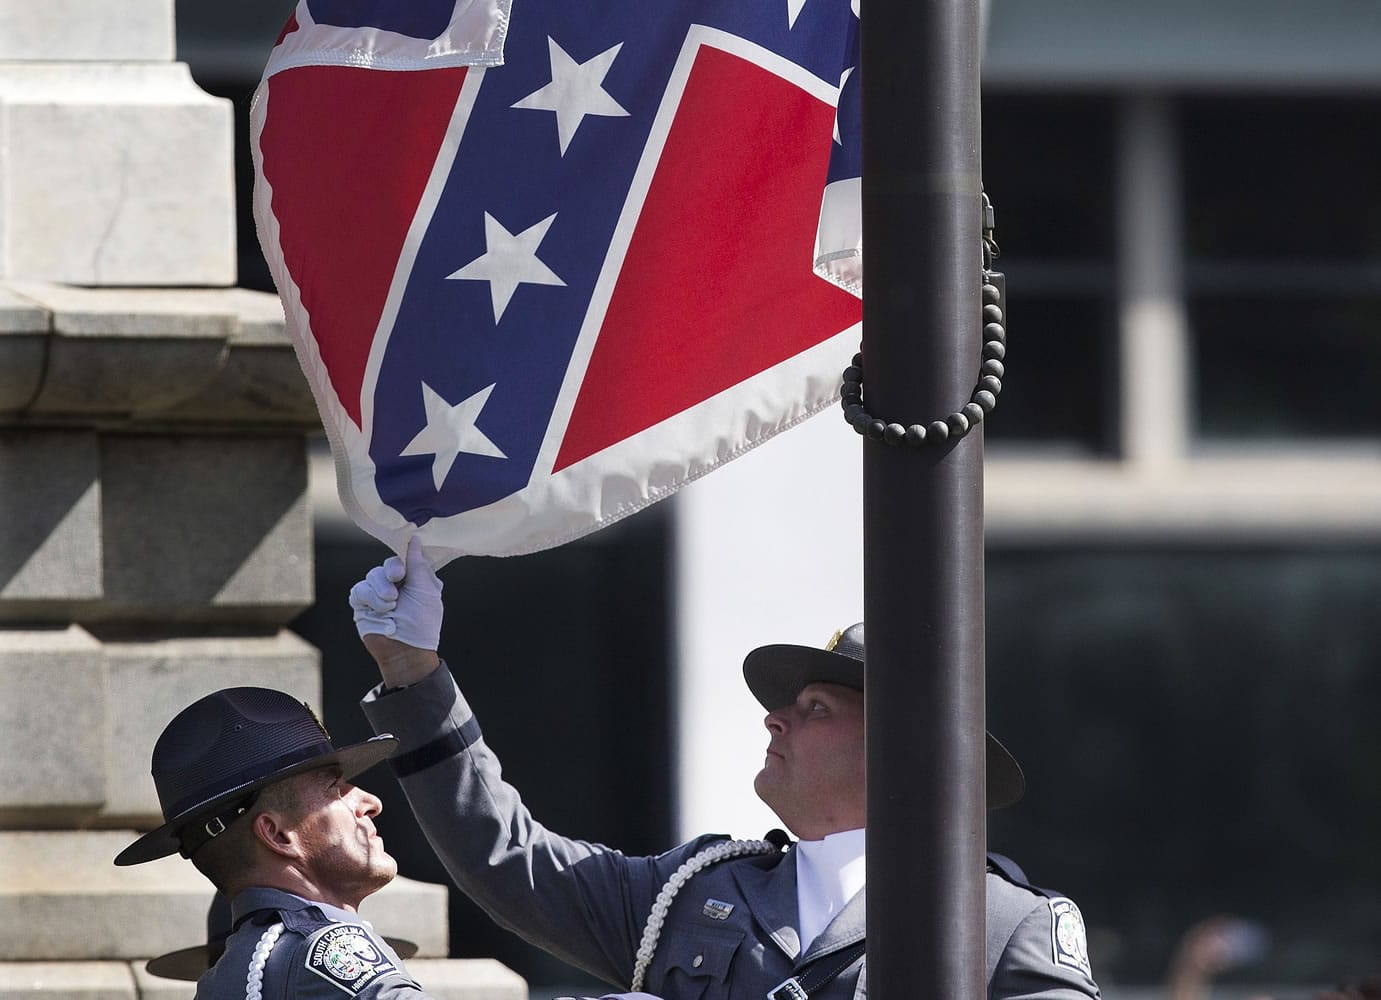 An honor guard from the South Carolina Highway patrol lowers the Confederate battle flag as it is removed from the Capitol grounds Friday in Columbia, S.C. The Confederate flag was lowered from the grounds of the South Carolina Statehouse to the cheers of thousands on Friday, ending its 54-year presence there and marking a stunning political reversal in a state where many thought the rebel banner would fly indefinitely.